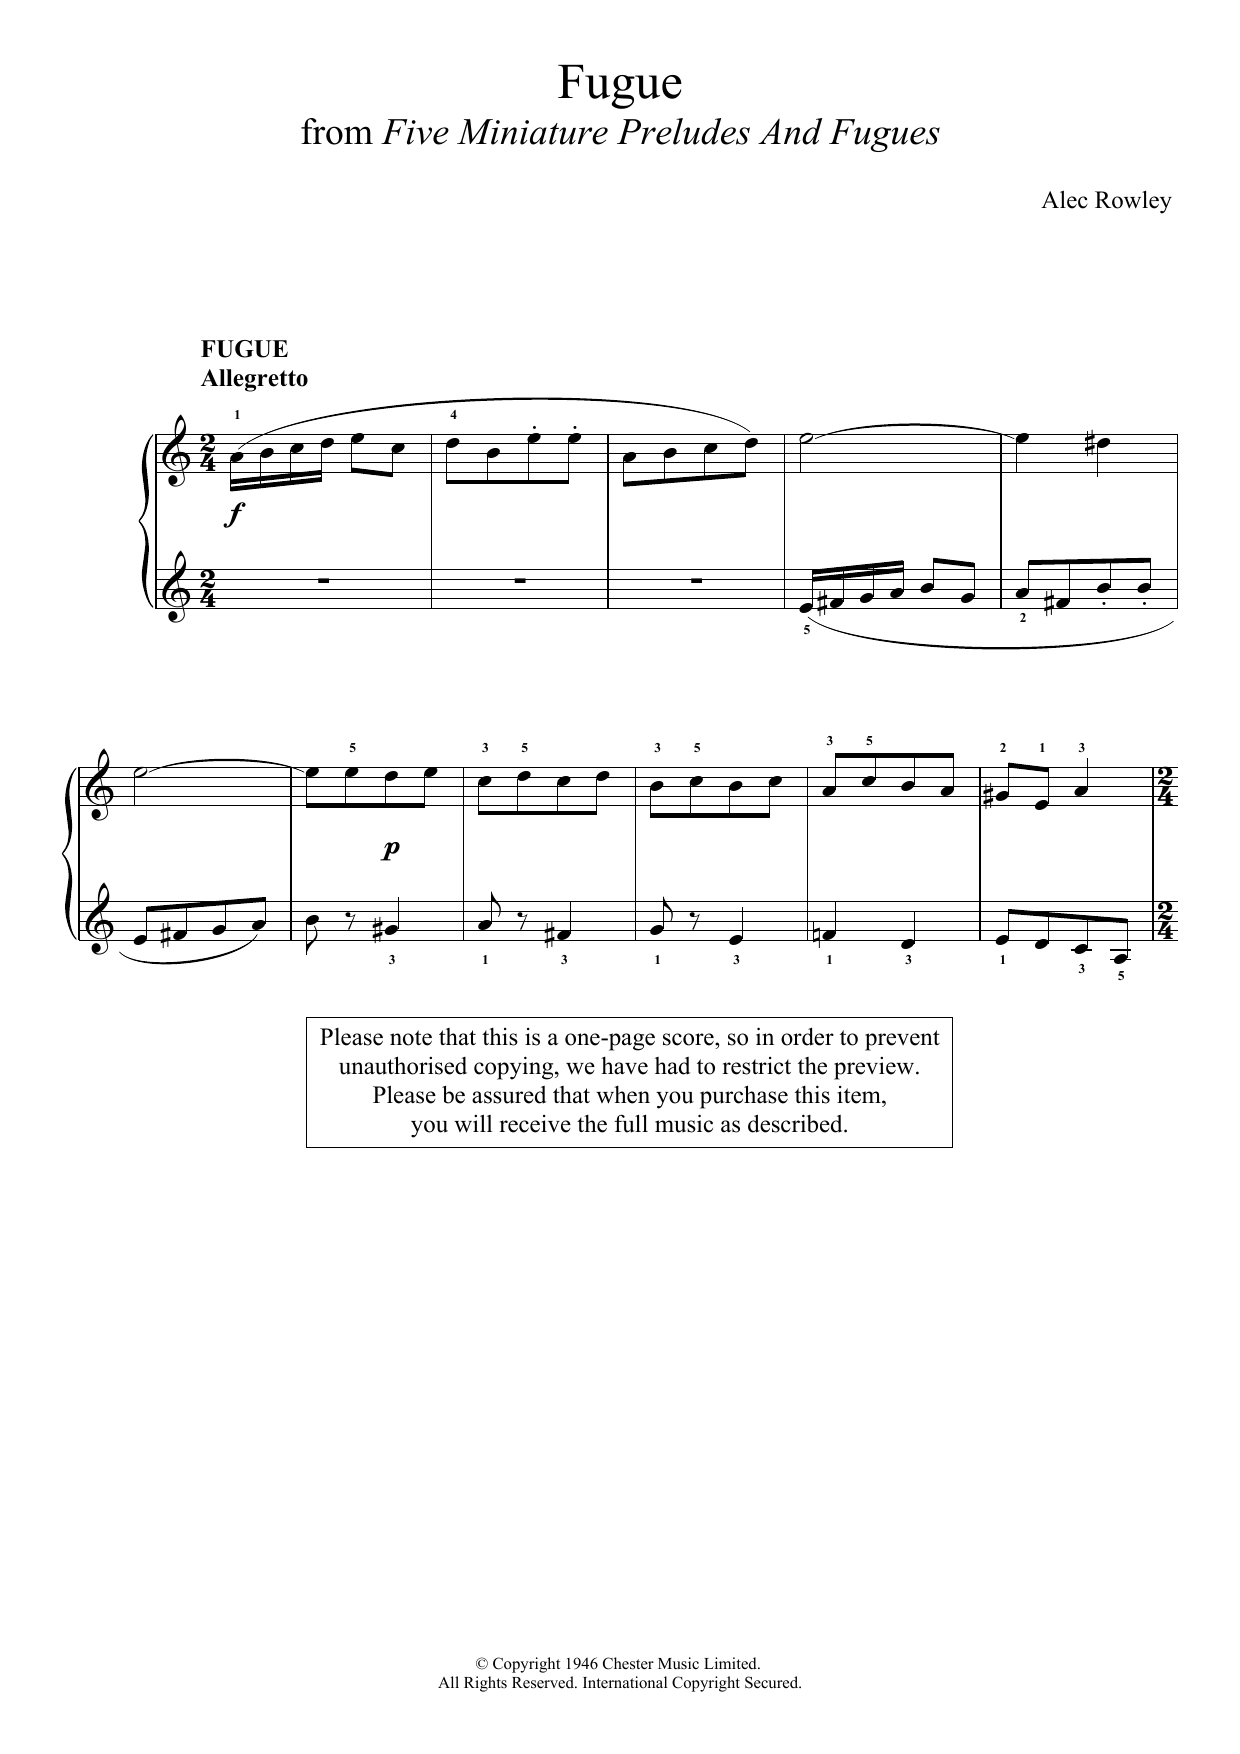 Alec Rowley Fugue (from Five Miniature Preludes And Fugues) sheet music notes and chords. Download Printable PDF.